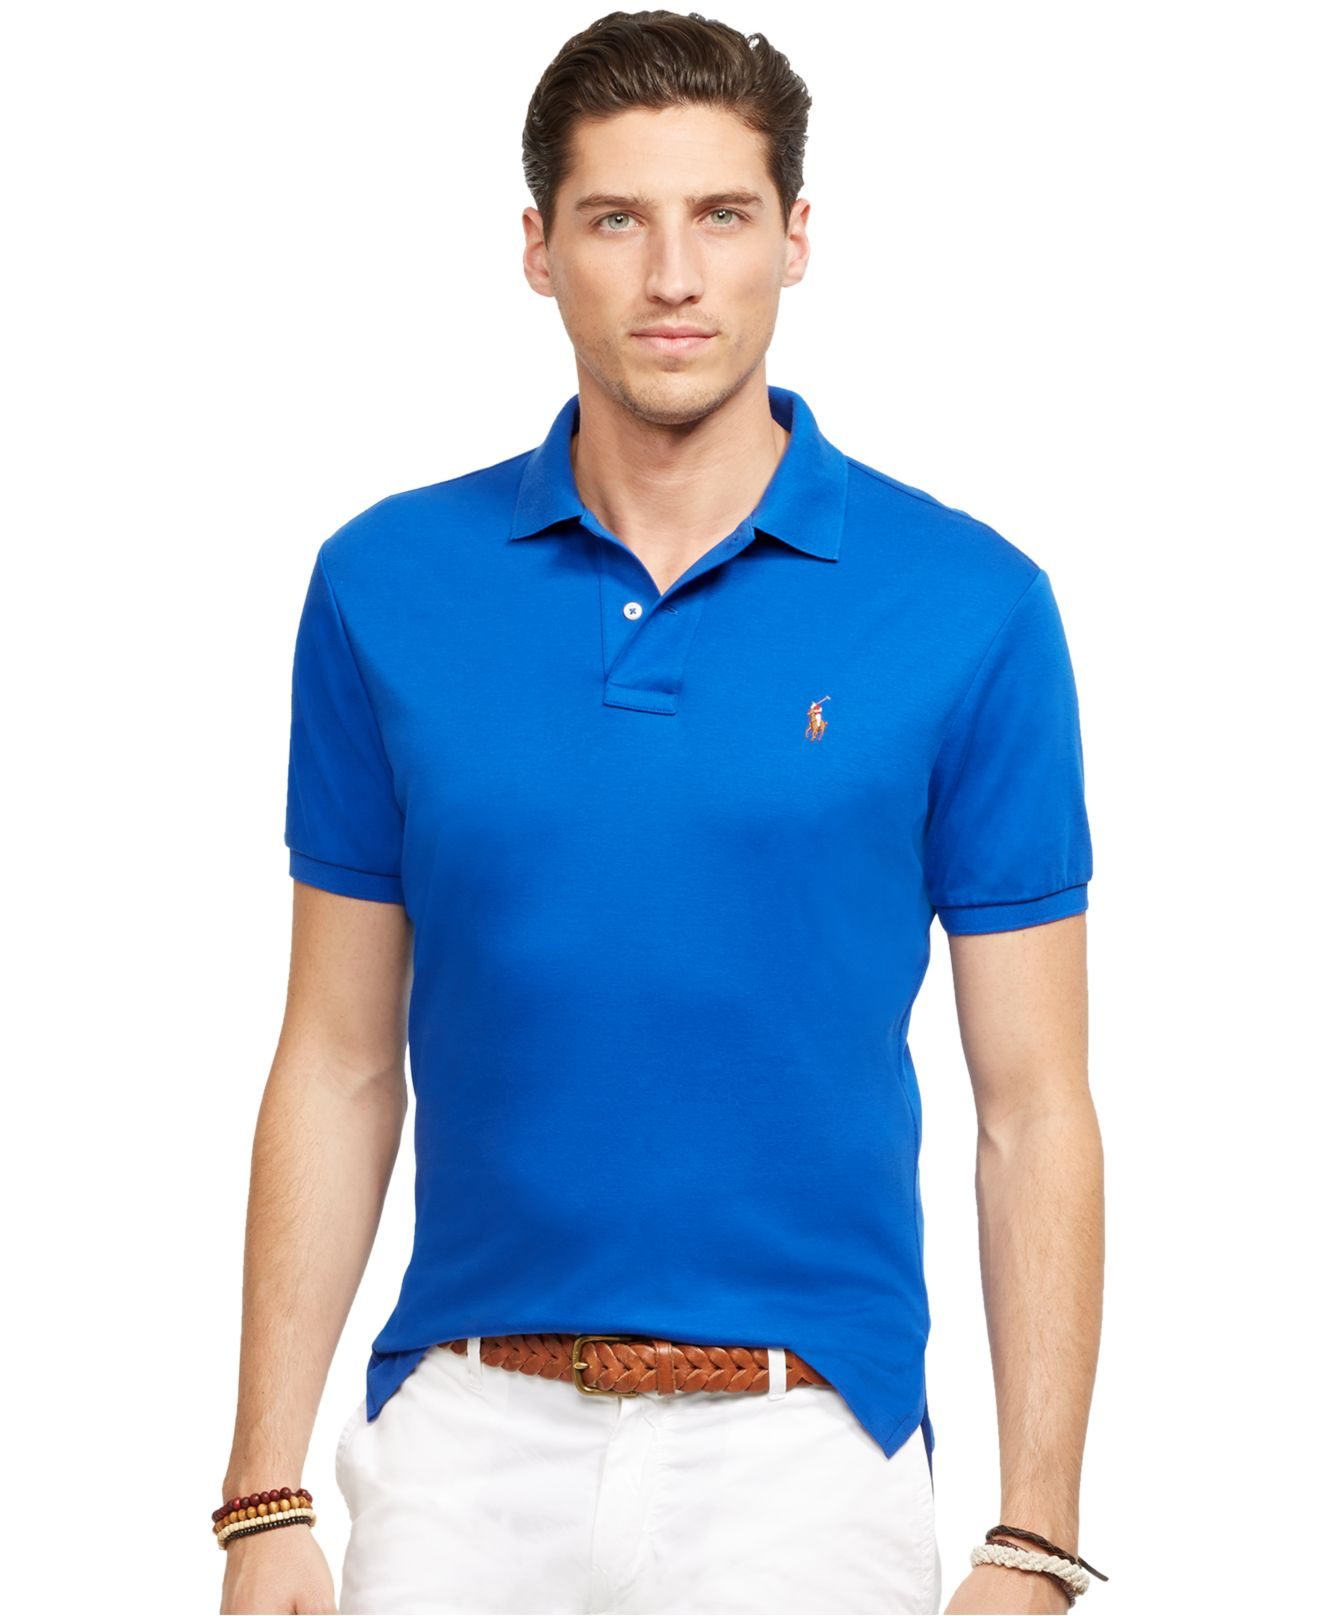 Lyst - Polo Ralph Lauren Pima Soft-touch Polo Shirt in Blue for Men